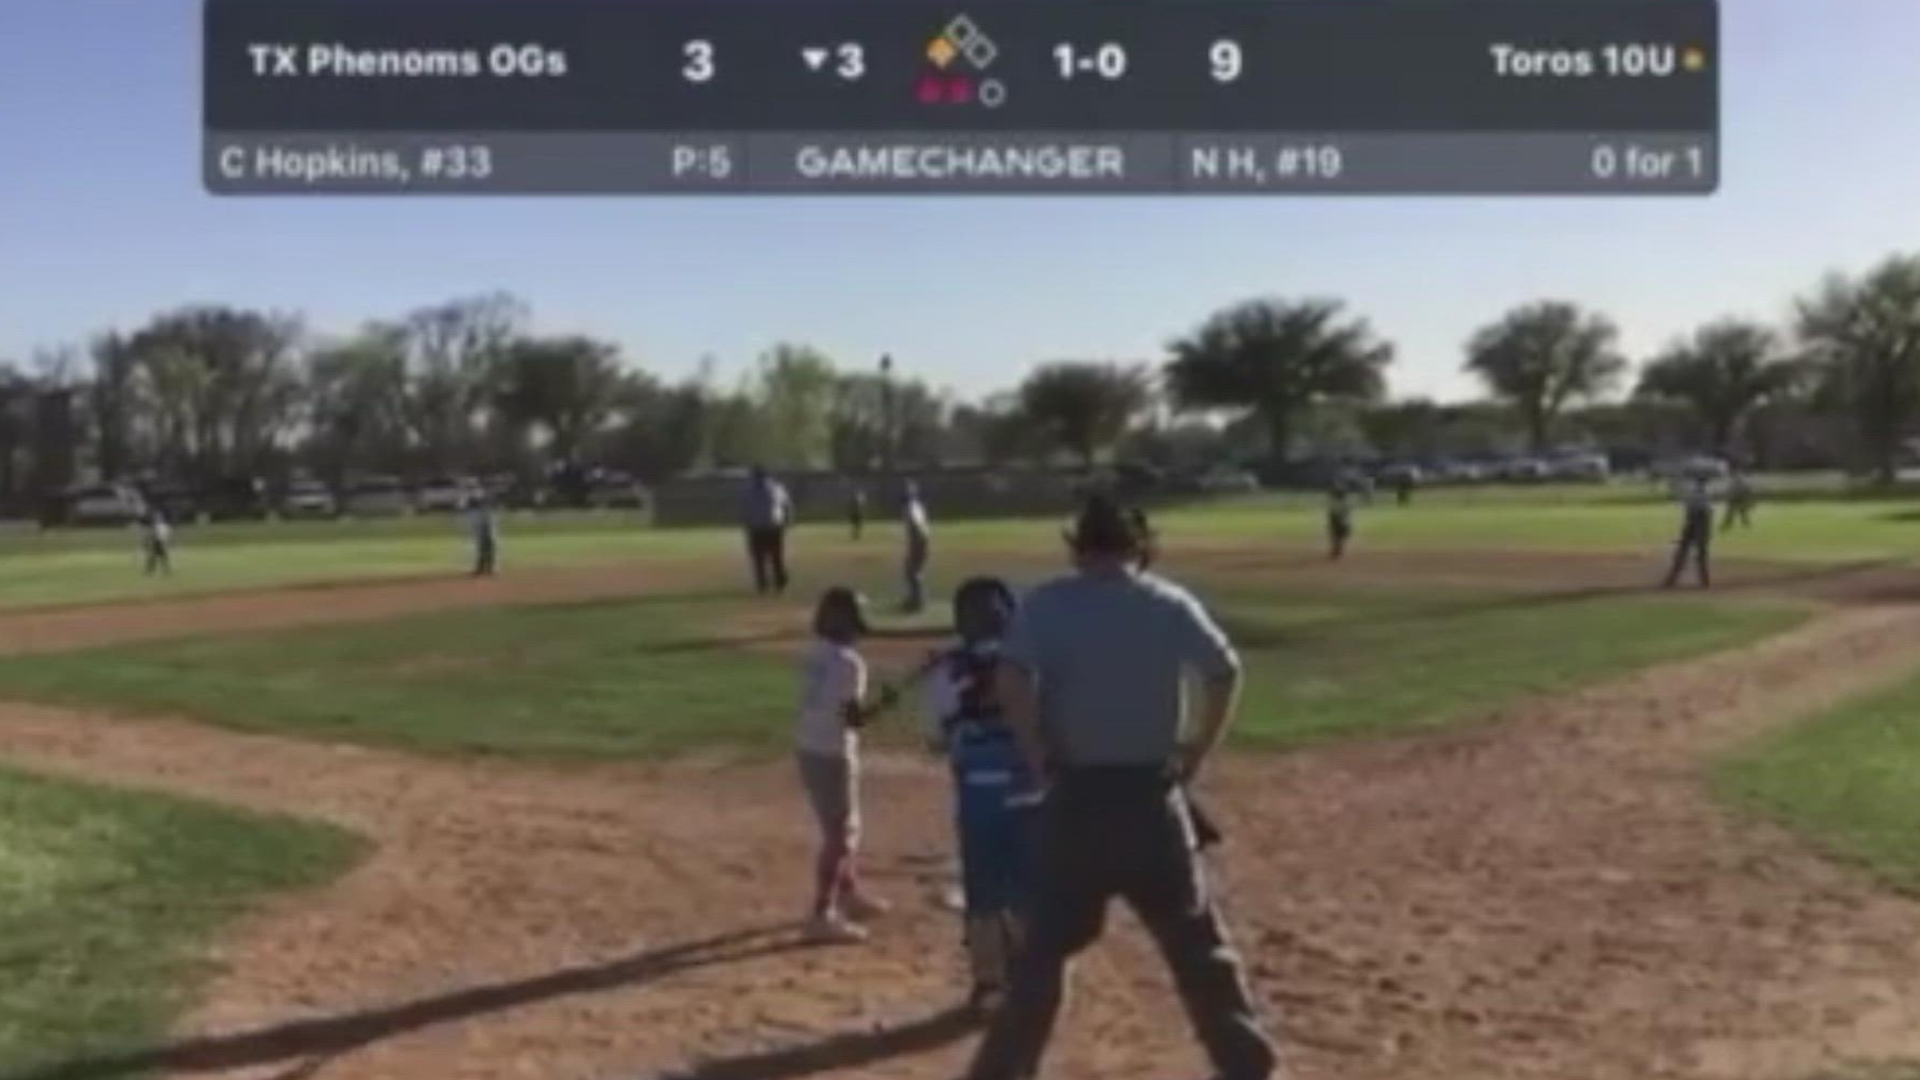 Video obtained by WFAA shows a Texas youth baseball coach assaulting an umpire after being ejected. The host of the tournament says the coach has been banned.